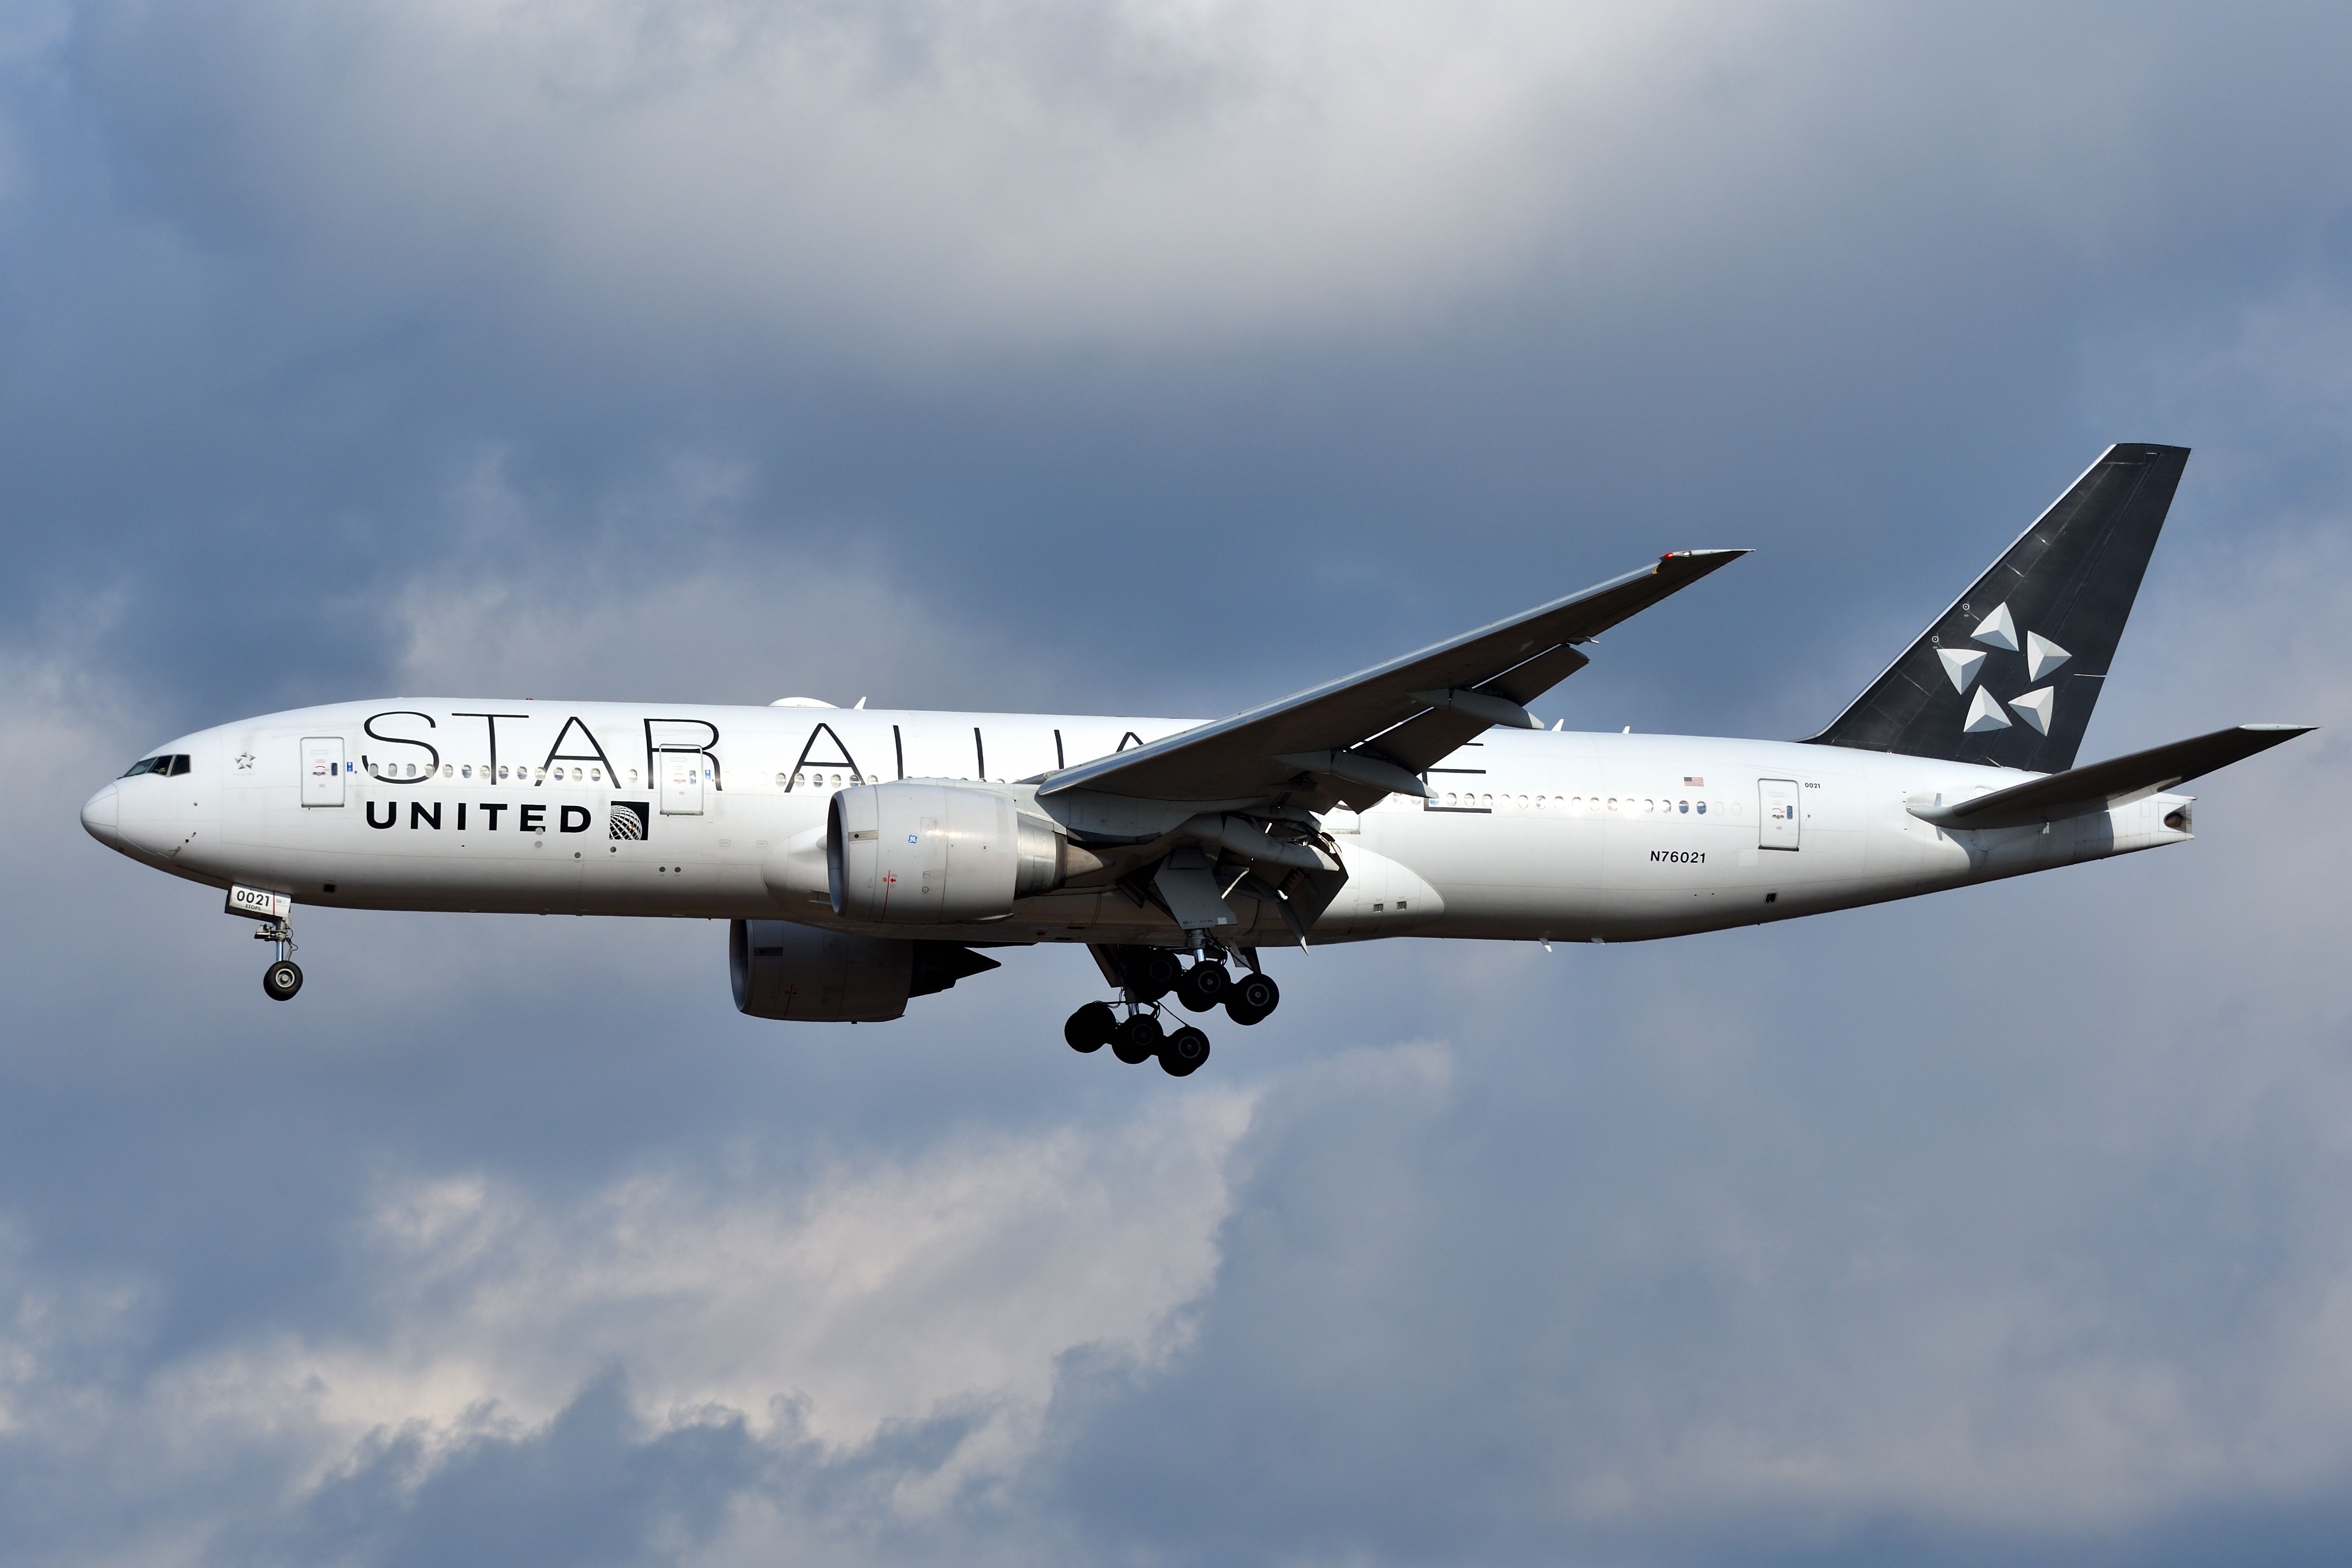 A United Airlines aircraft in Star Alliance livery.